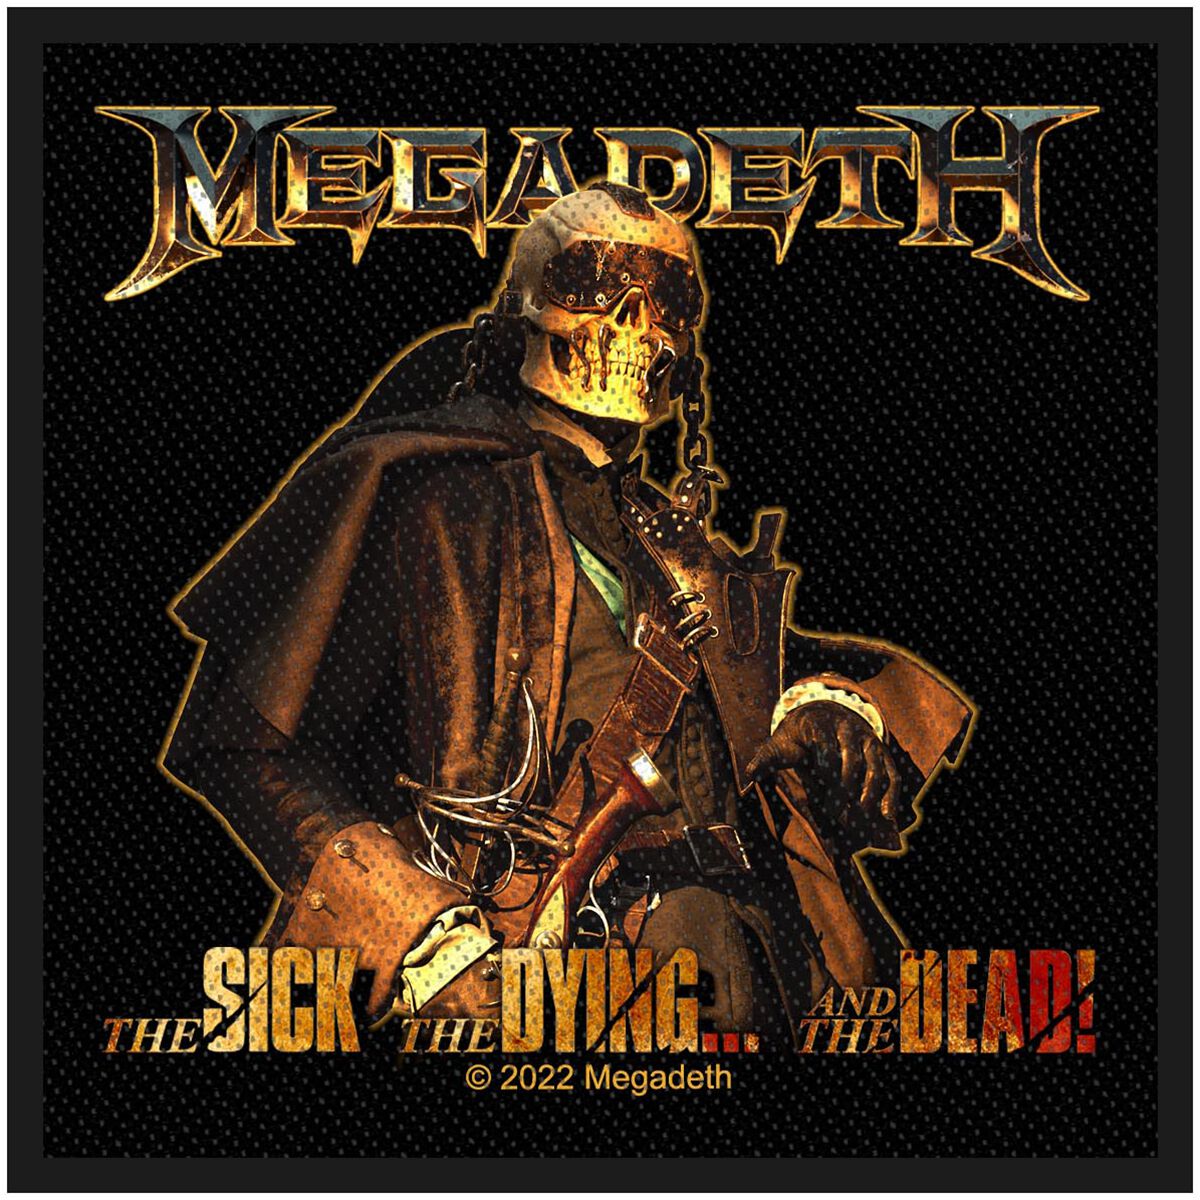 Megadeth - The Sick The Dying… And The Dead! - Patch - multicolor